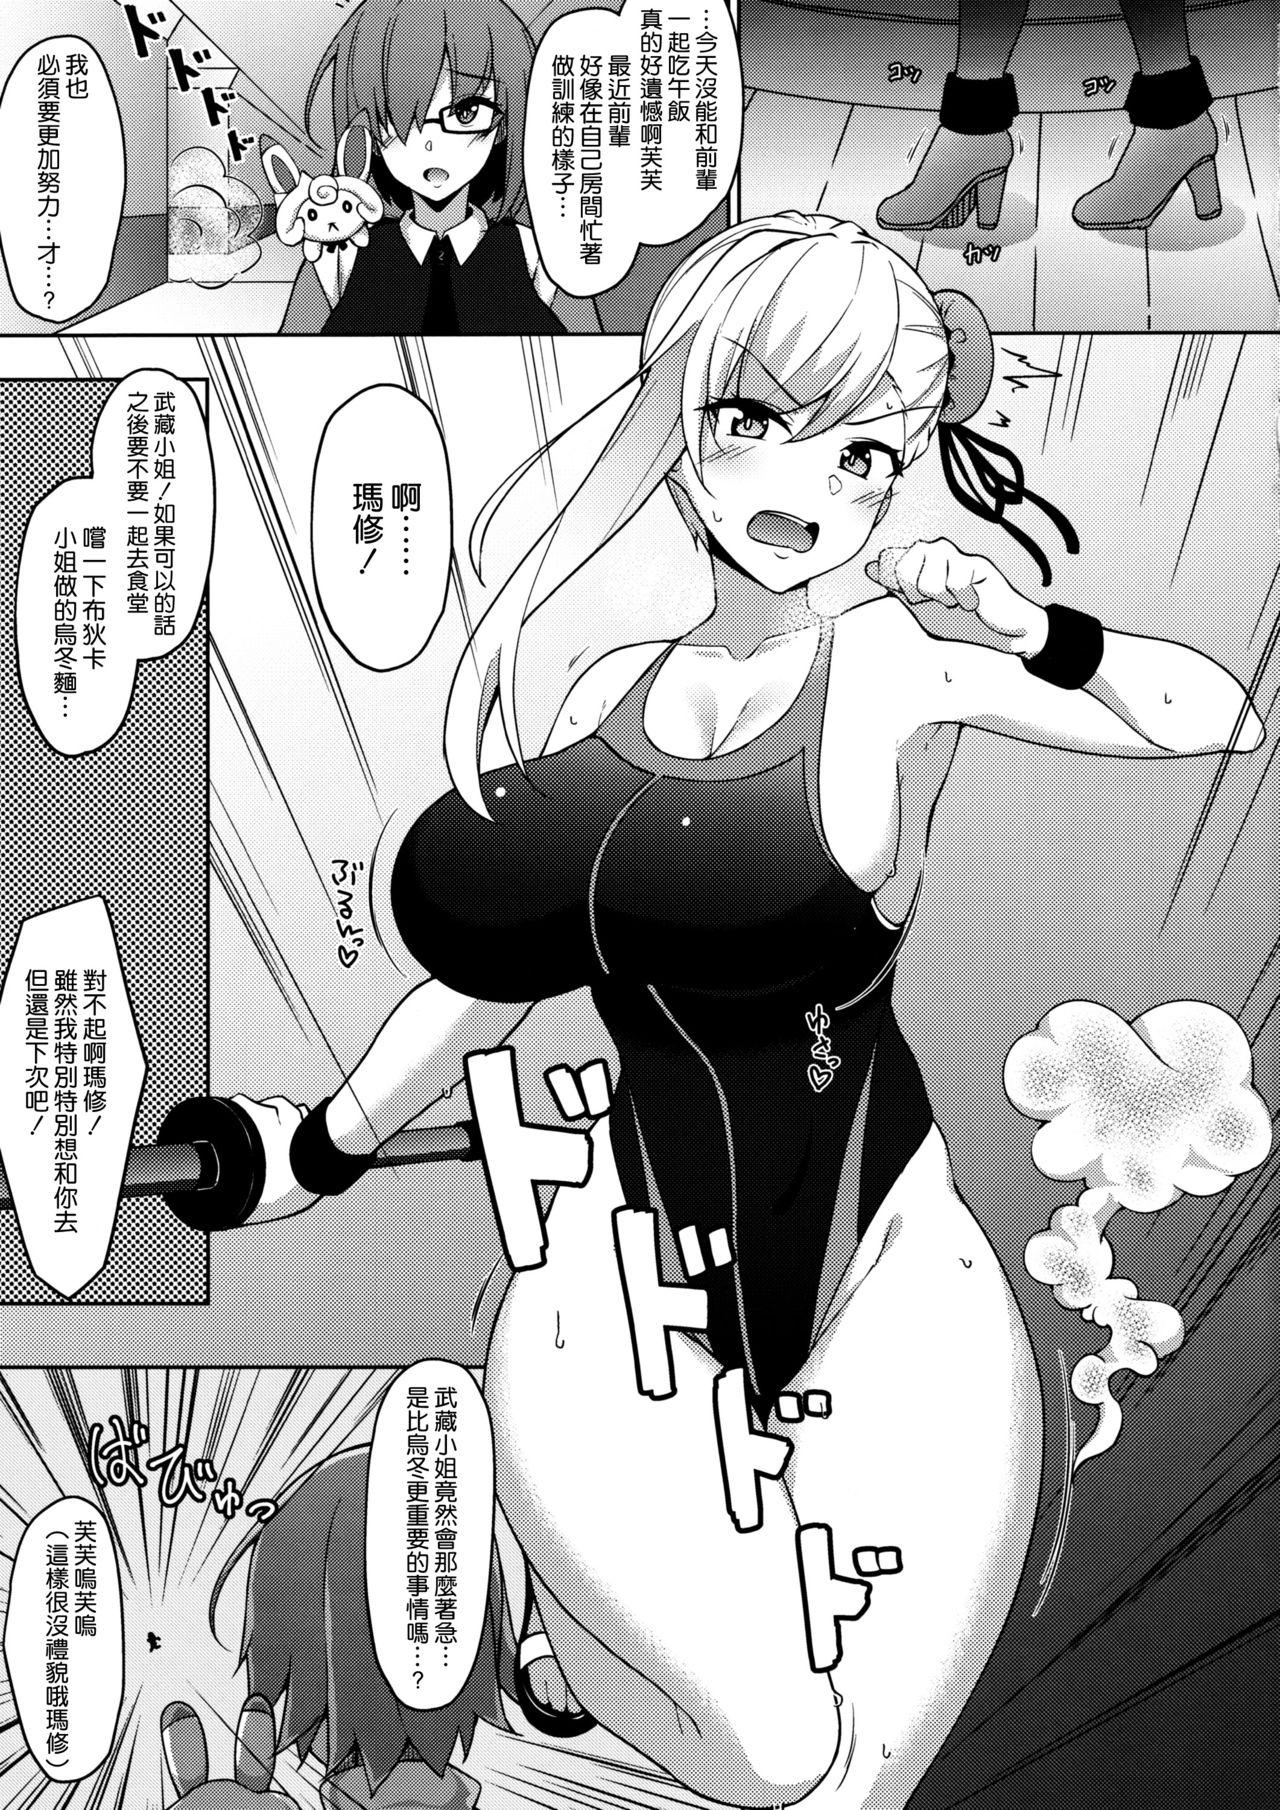 Dykes (C97) [Cow Lipid (Fuurai)] U-D-N-S (Fate/Grand Order) [Chinese] [空気系☆漢化] - Fate grand order Girl - Page 5